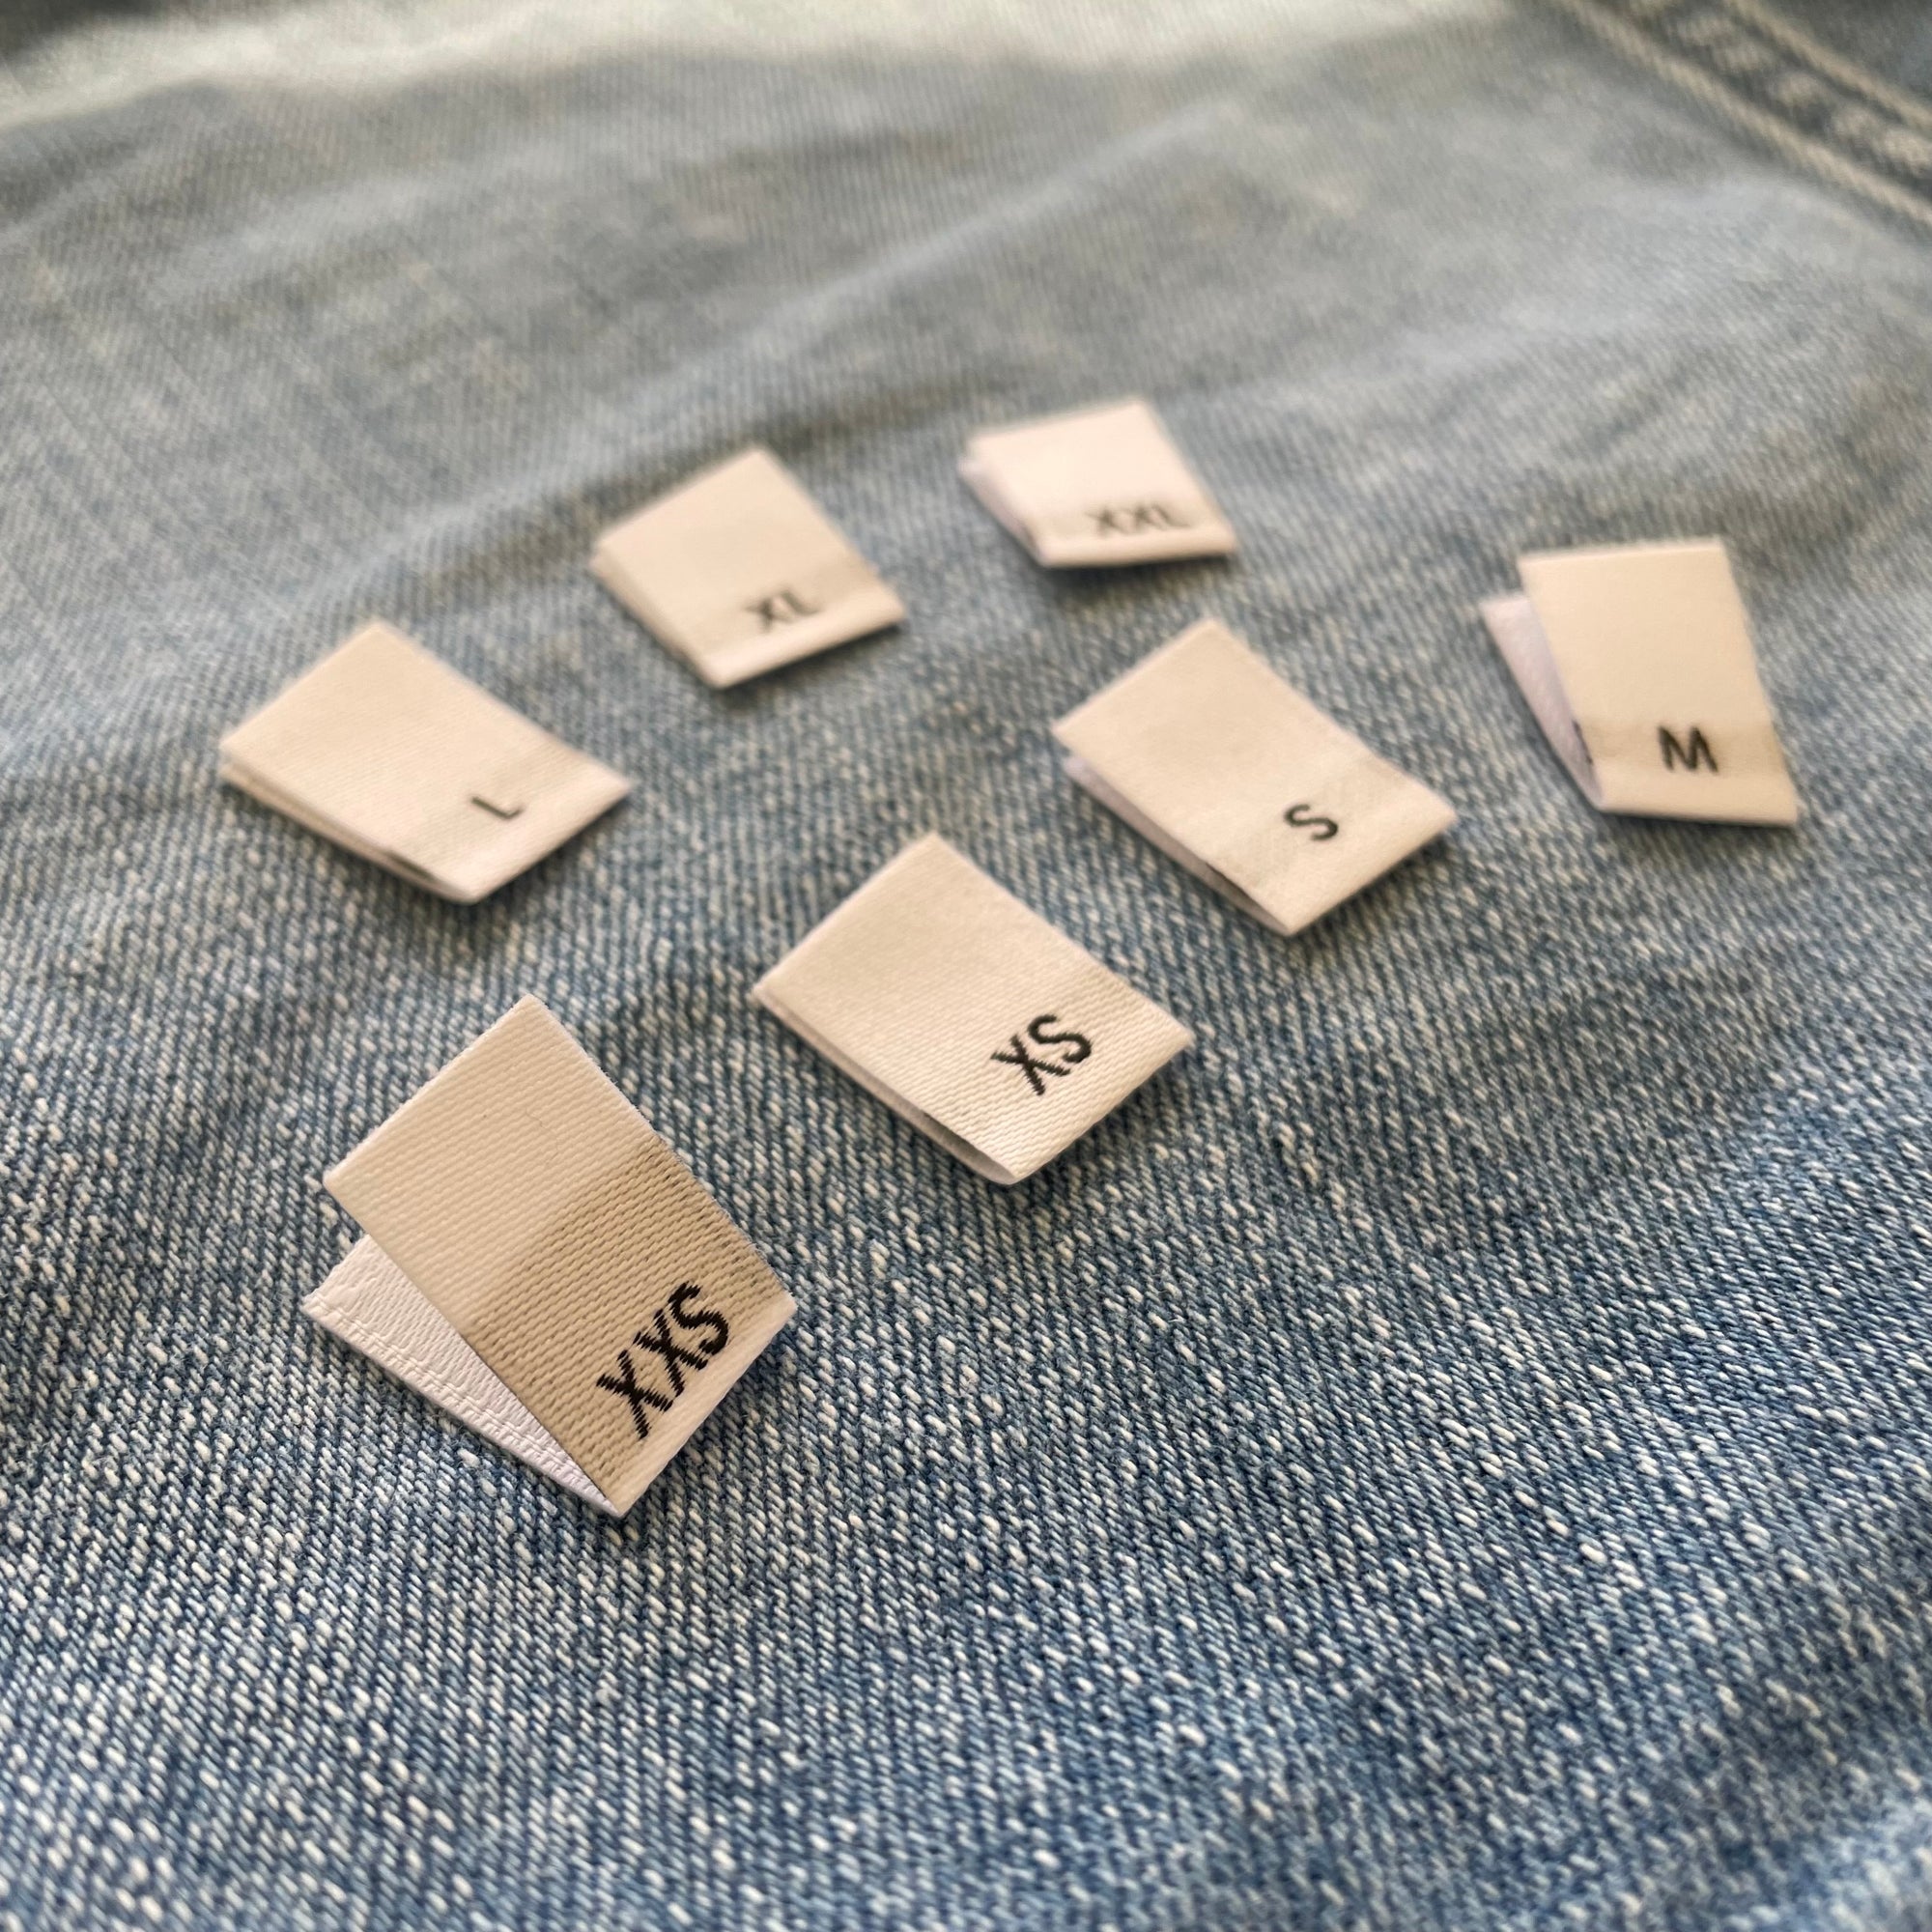 Woven Size Tags